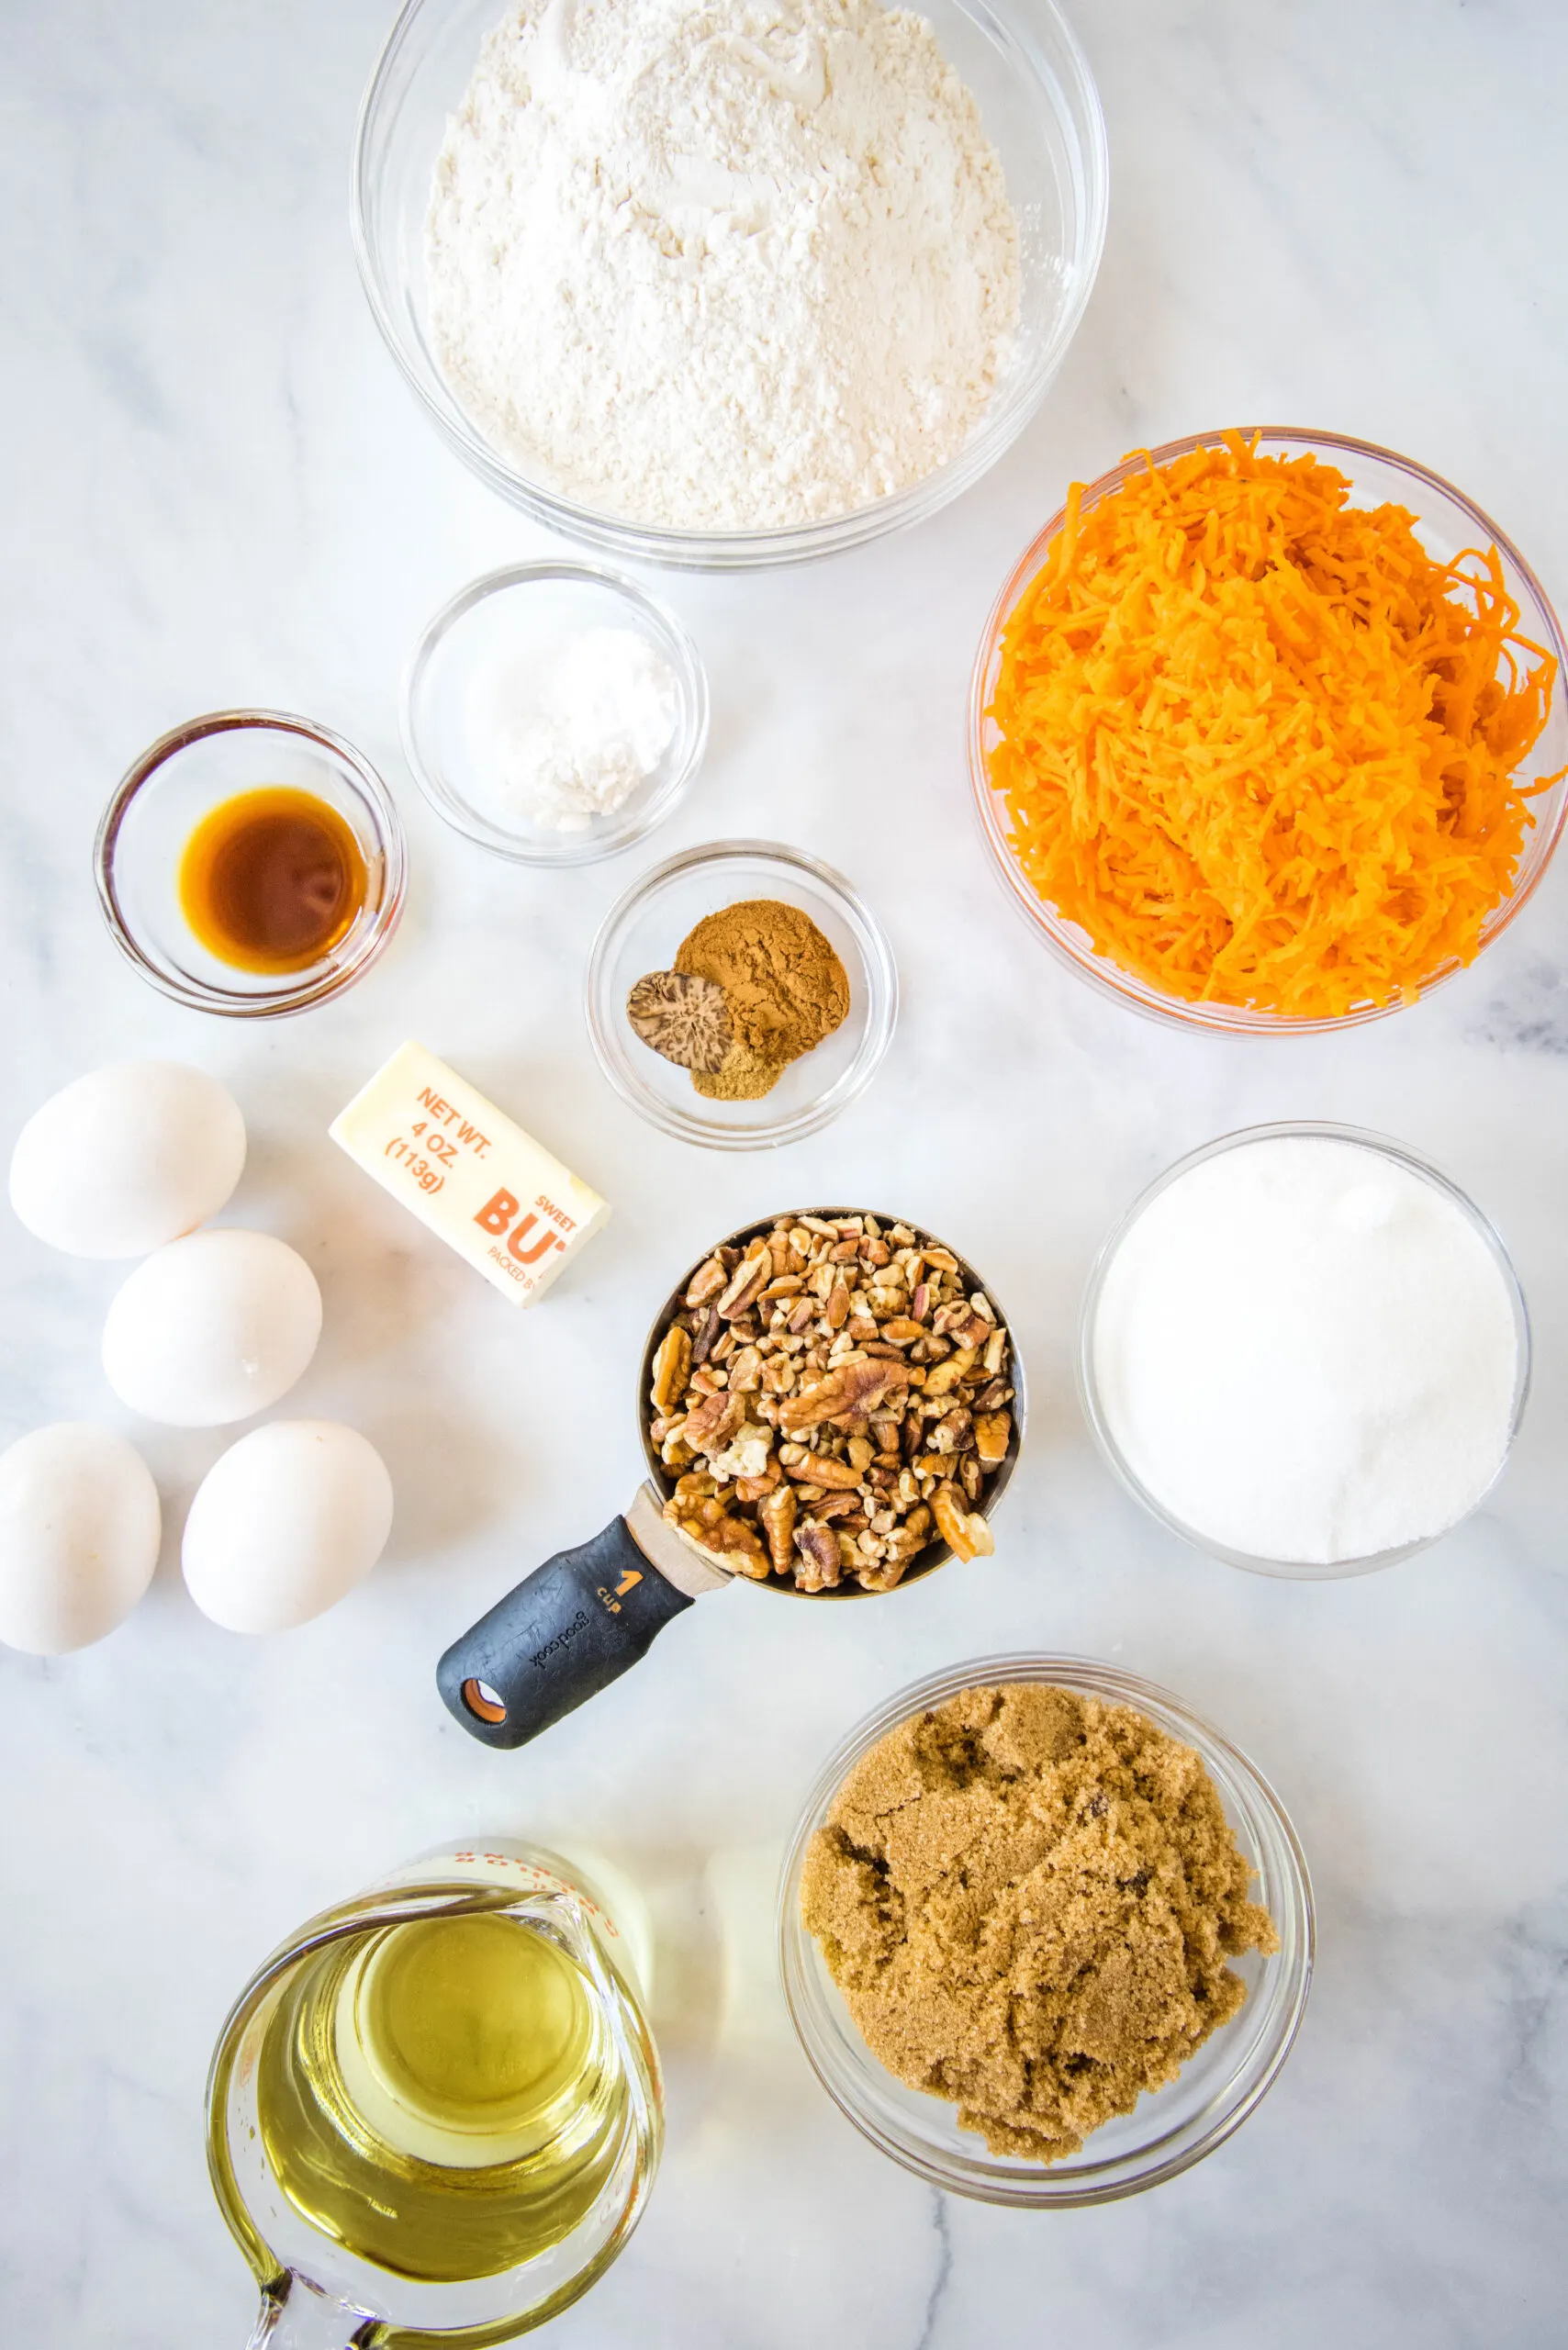 Ingredients for homemade carrot cake.